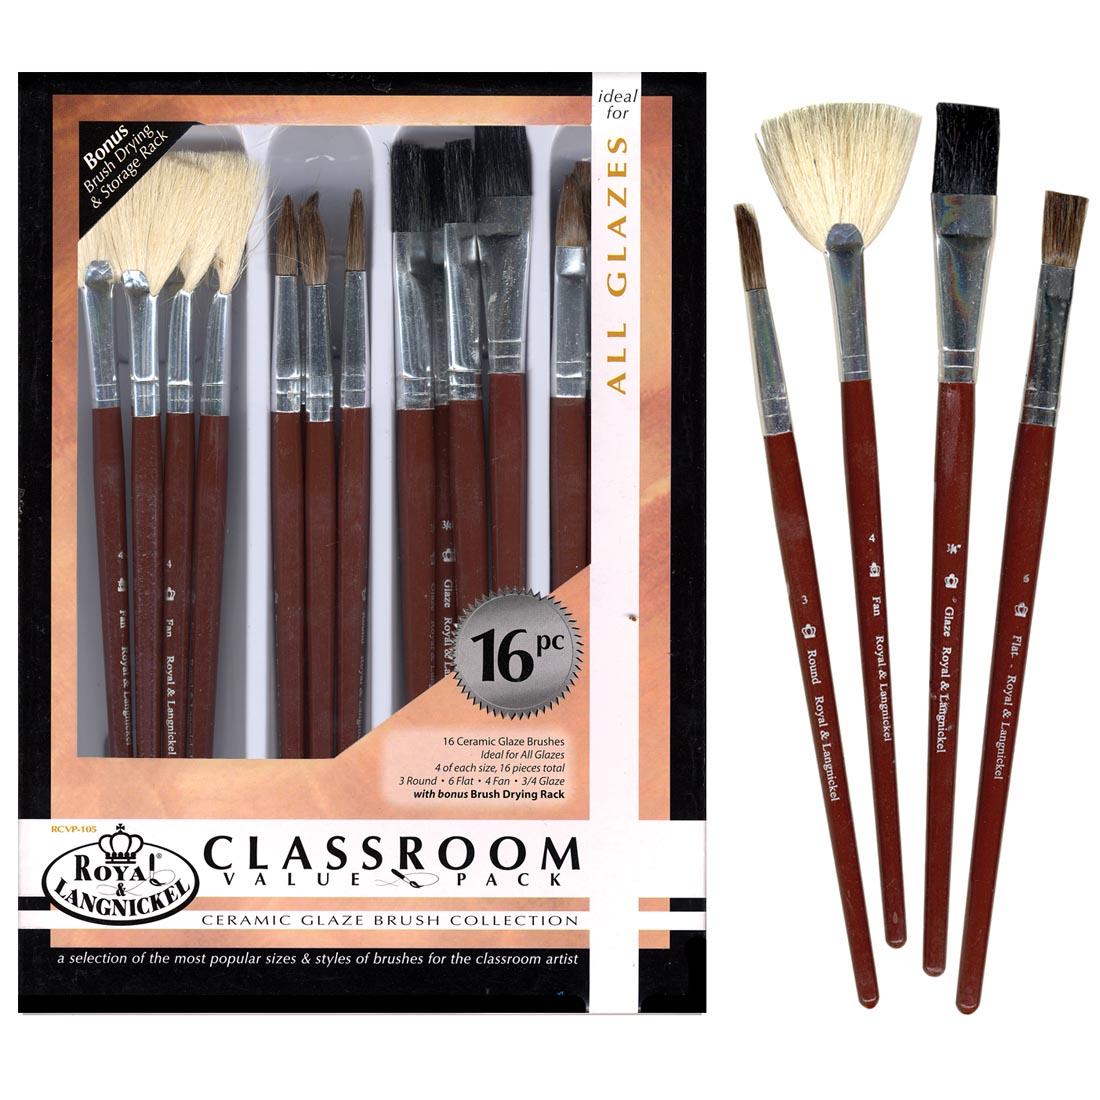 Royal & Langnickel Classroom Value Pack Ceramic Glaze Brush Collection shown in the package with examples of the 4 different brush styles beside it